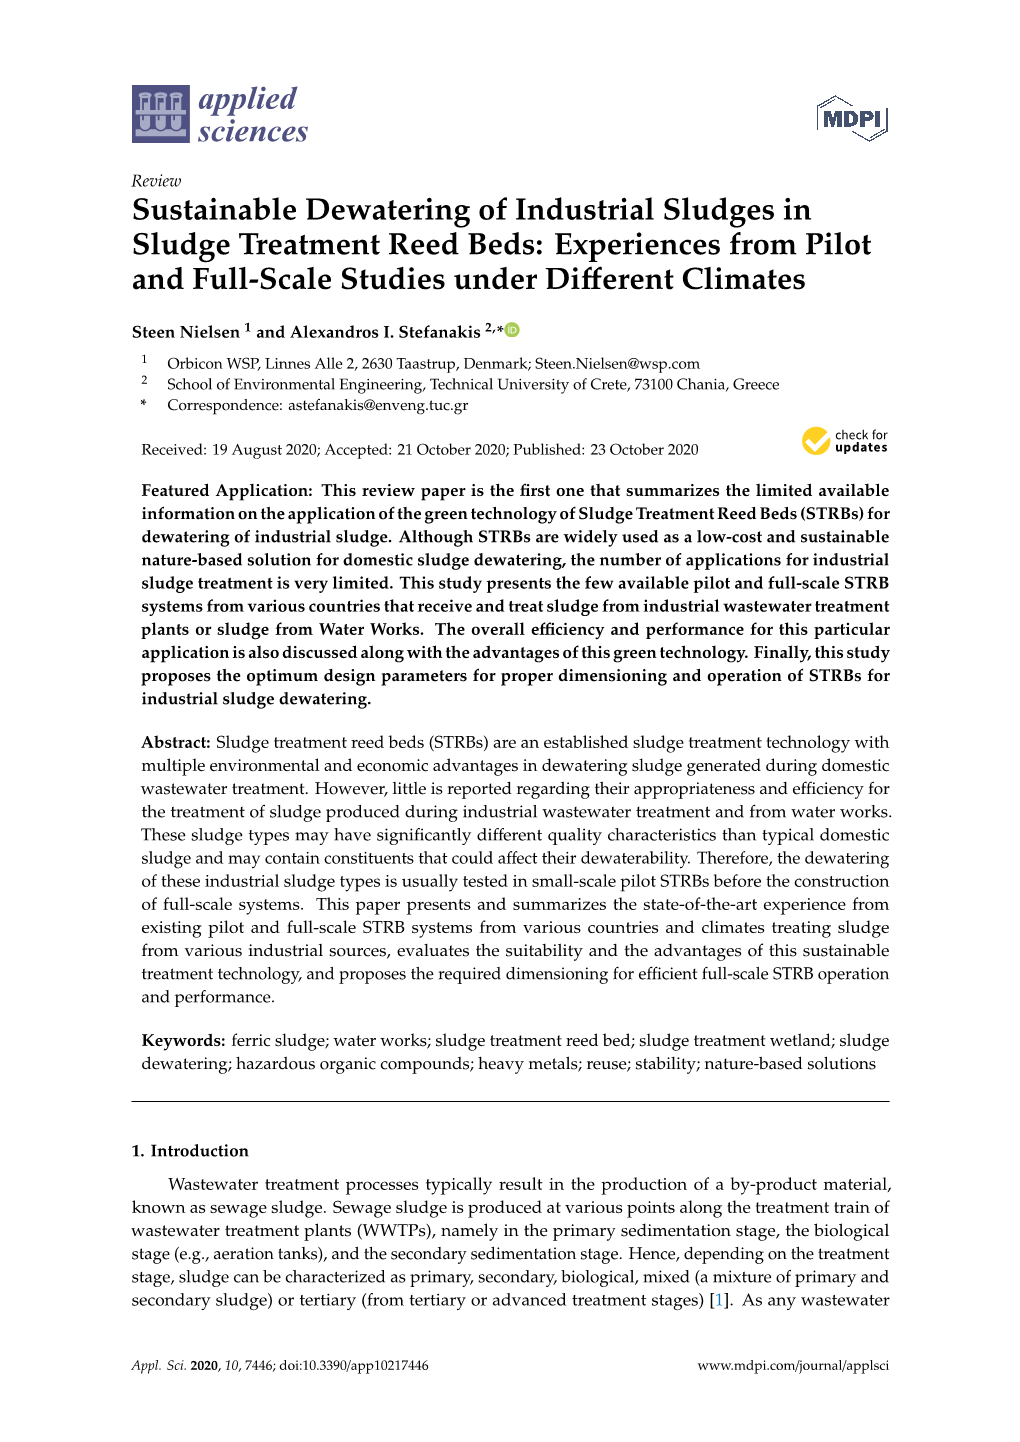 Sustainable Dewatering of Industrial Sludges in Sludge Treatment Reed Beds: Experiences from Pilot and Full-Scale Studies Under Diﬀerent Climates